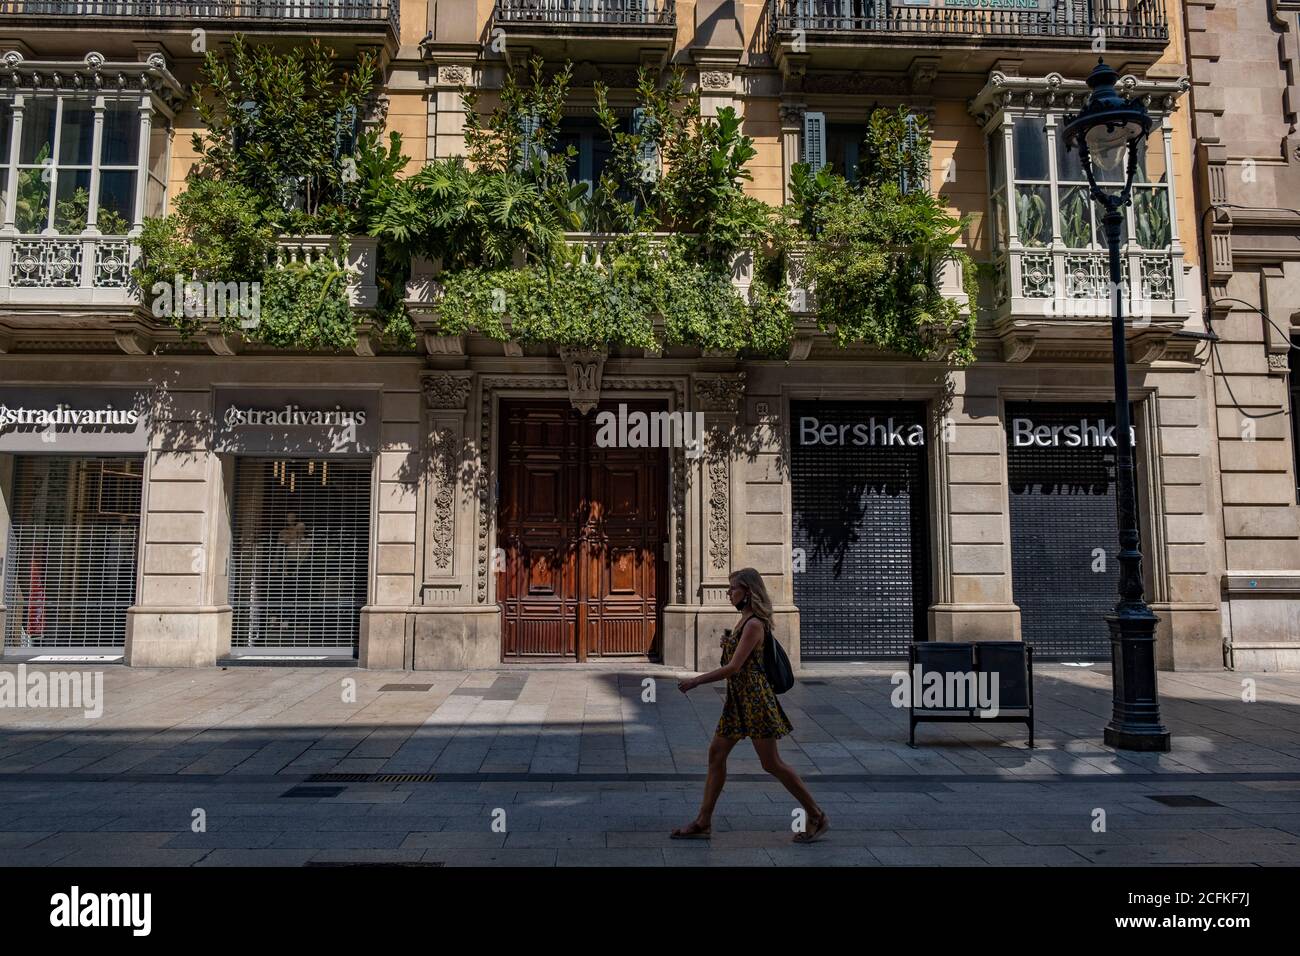 Barcelona, Spain. 06th Sep, 2020. A Stradivarius store and a Bershka store,  brands of the Inditex textile group, are seen at adjoining doors in the  commercial hub of Portal del l'Àngel.After presenting